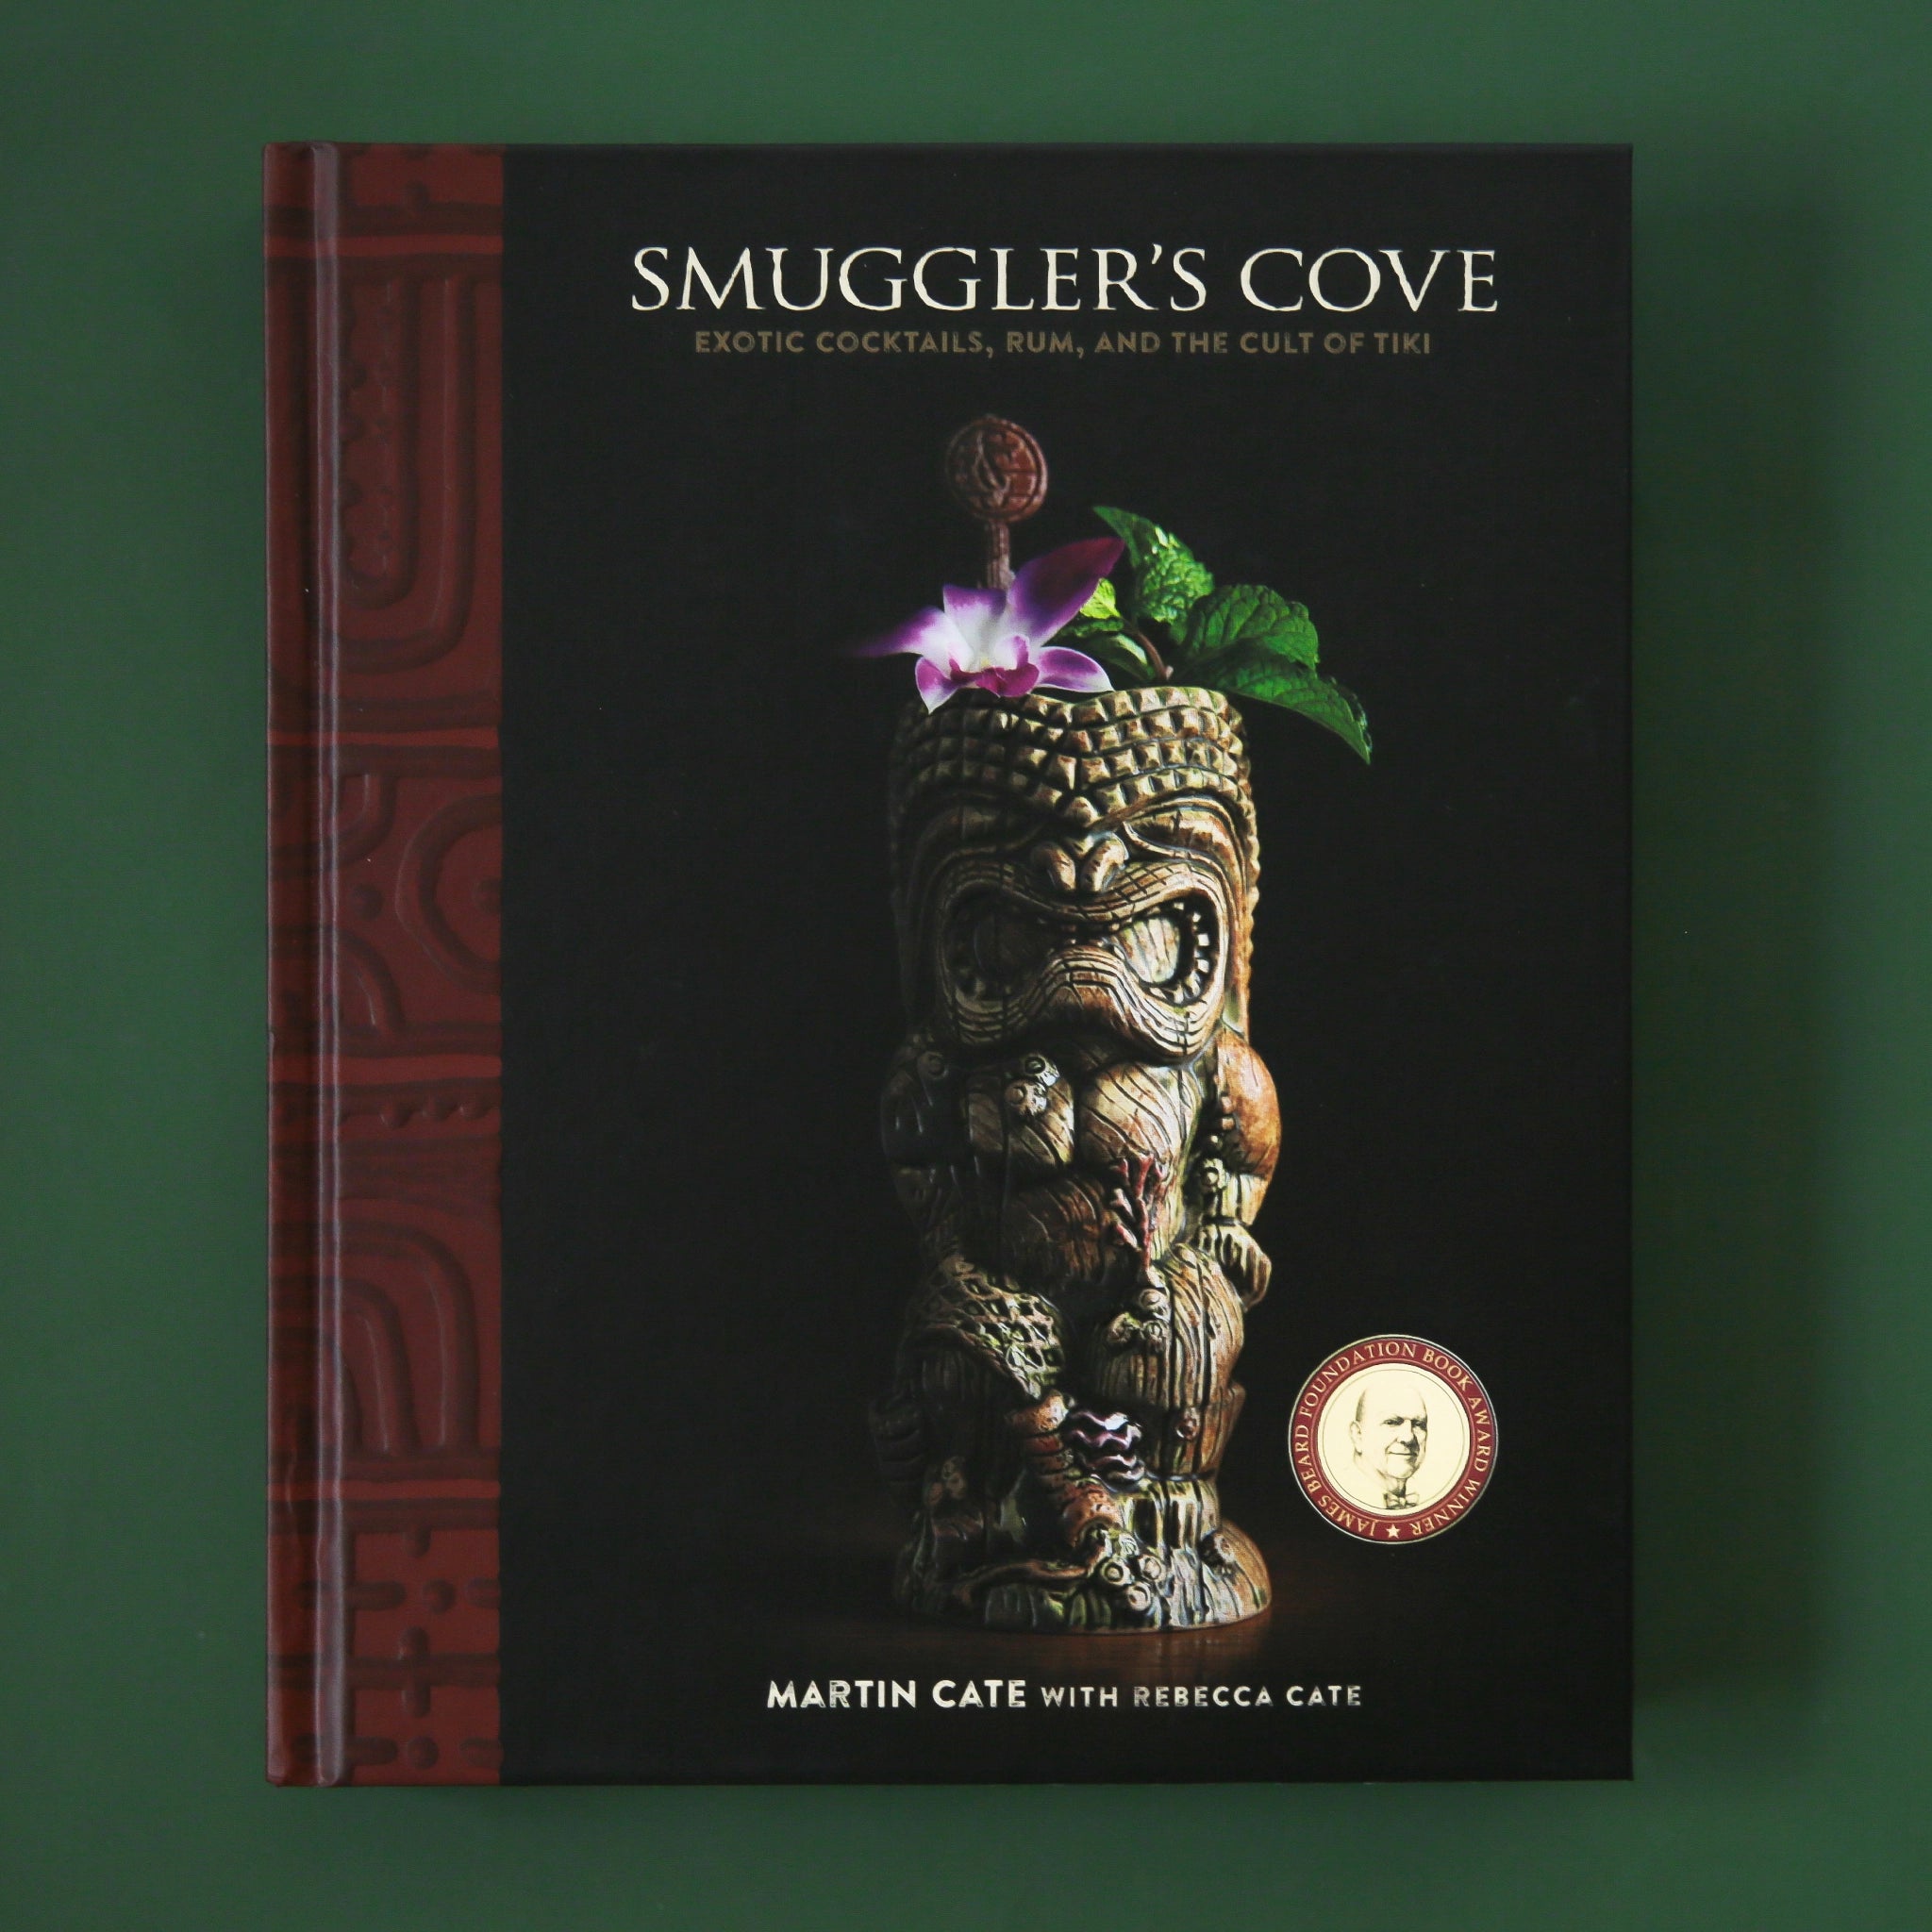 A book with a black cover that has a carved tiki on the front along with the title, &quot;Smuggler&#39;s Cove, Exotic Cocktails, Rum and the Cult of Tiki&quot;.